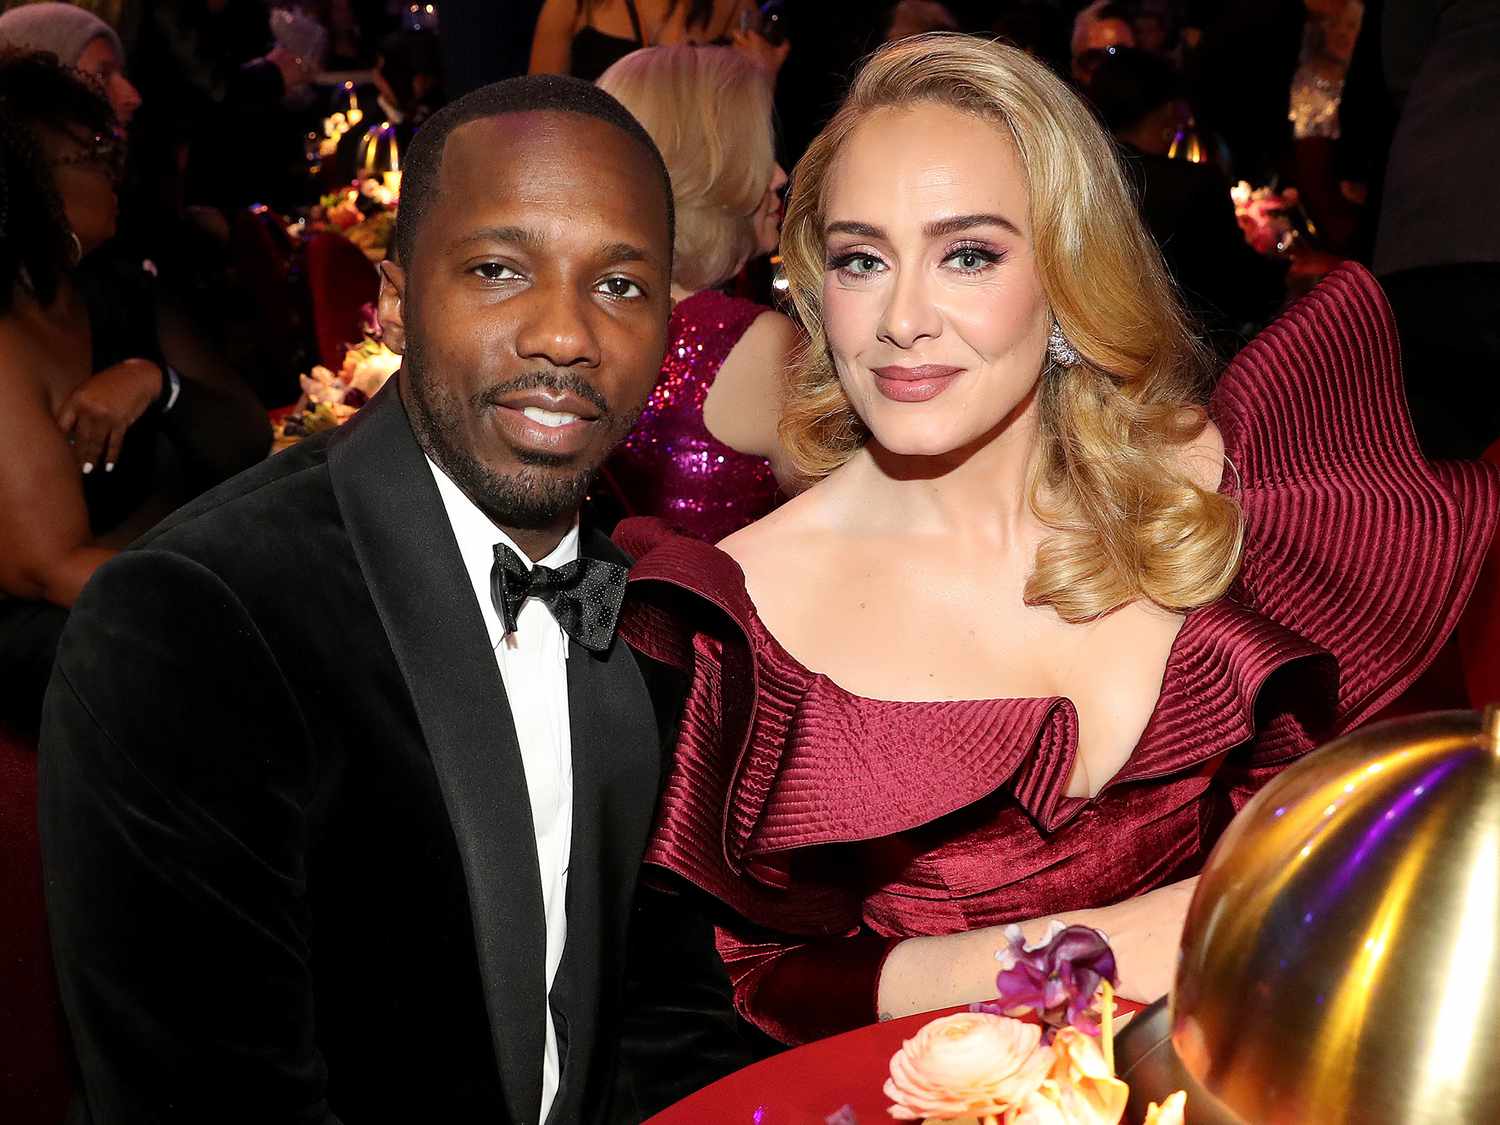 Adele Reveals Major Plans for the Future as She Tells Fans at Vegas Residency She Wants to Have a Baby Girl with Rich Paul